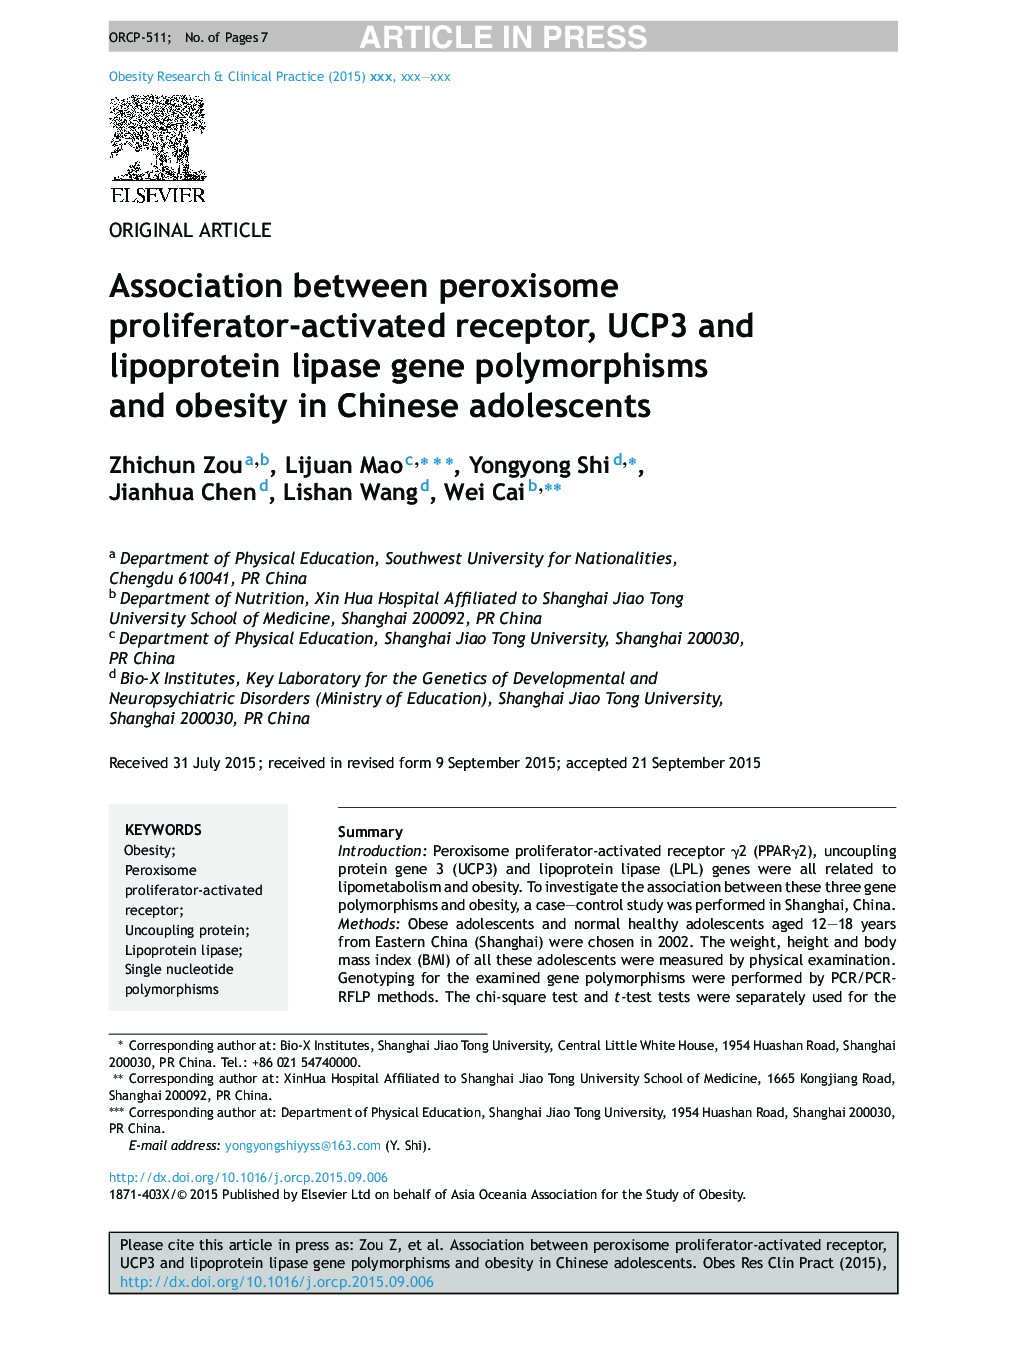 RETRACTED: Association between peroxisome proliferator-activated receptor, UCP3 and lipoprotein lipase gene polymorphisms and obesity in Chinese adolescents